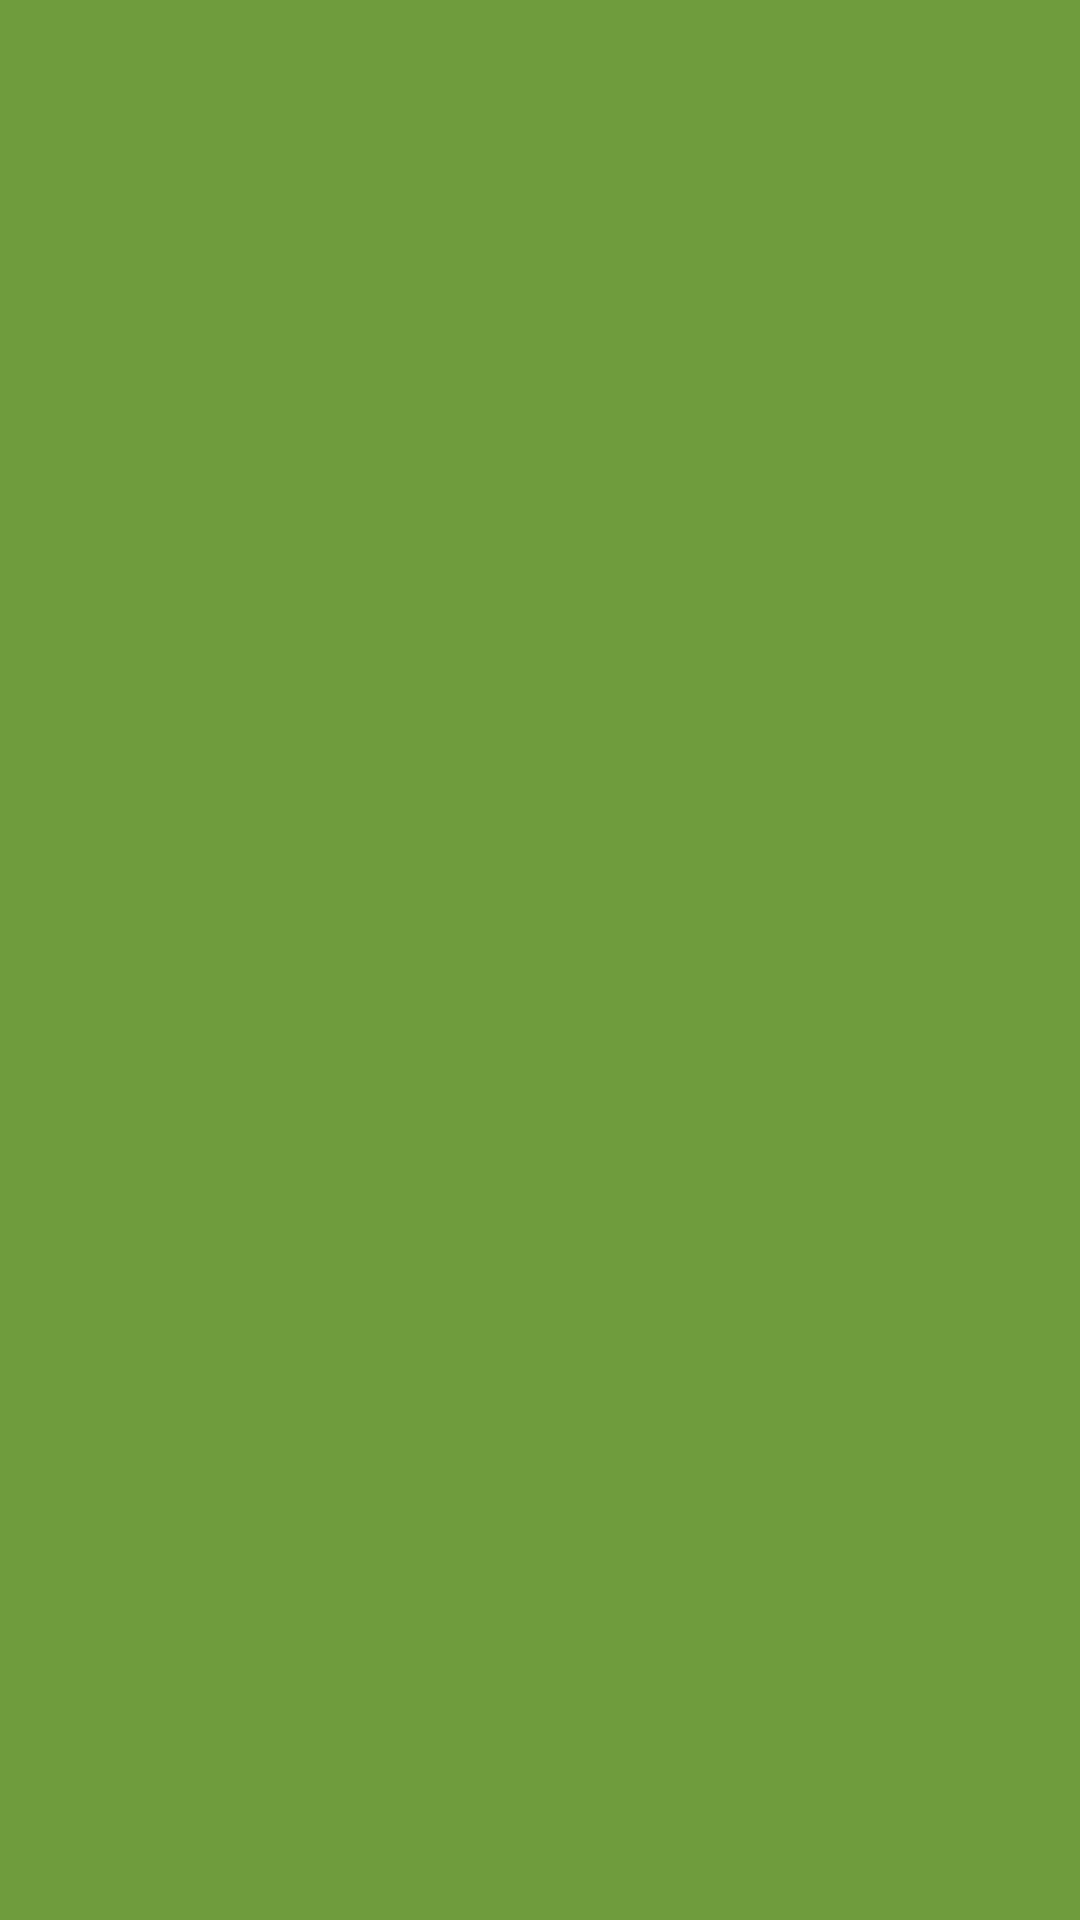 Solid Color Chartreuse Green Background